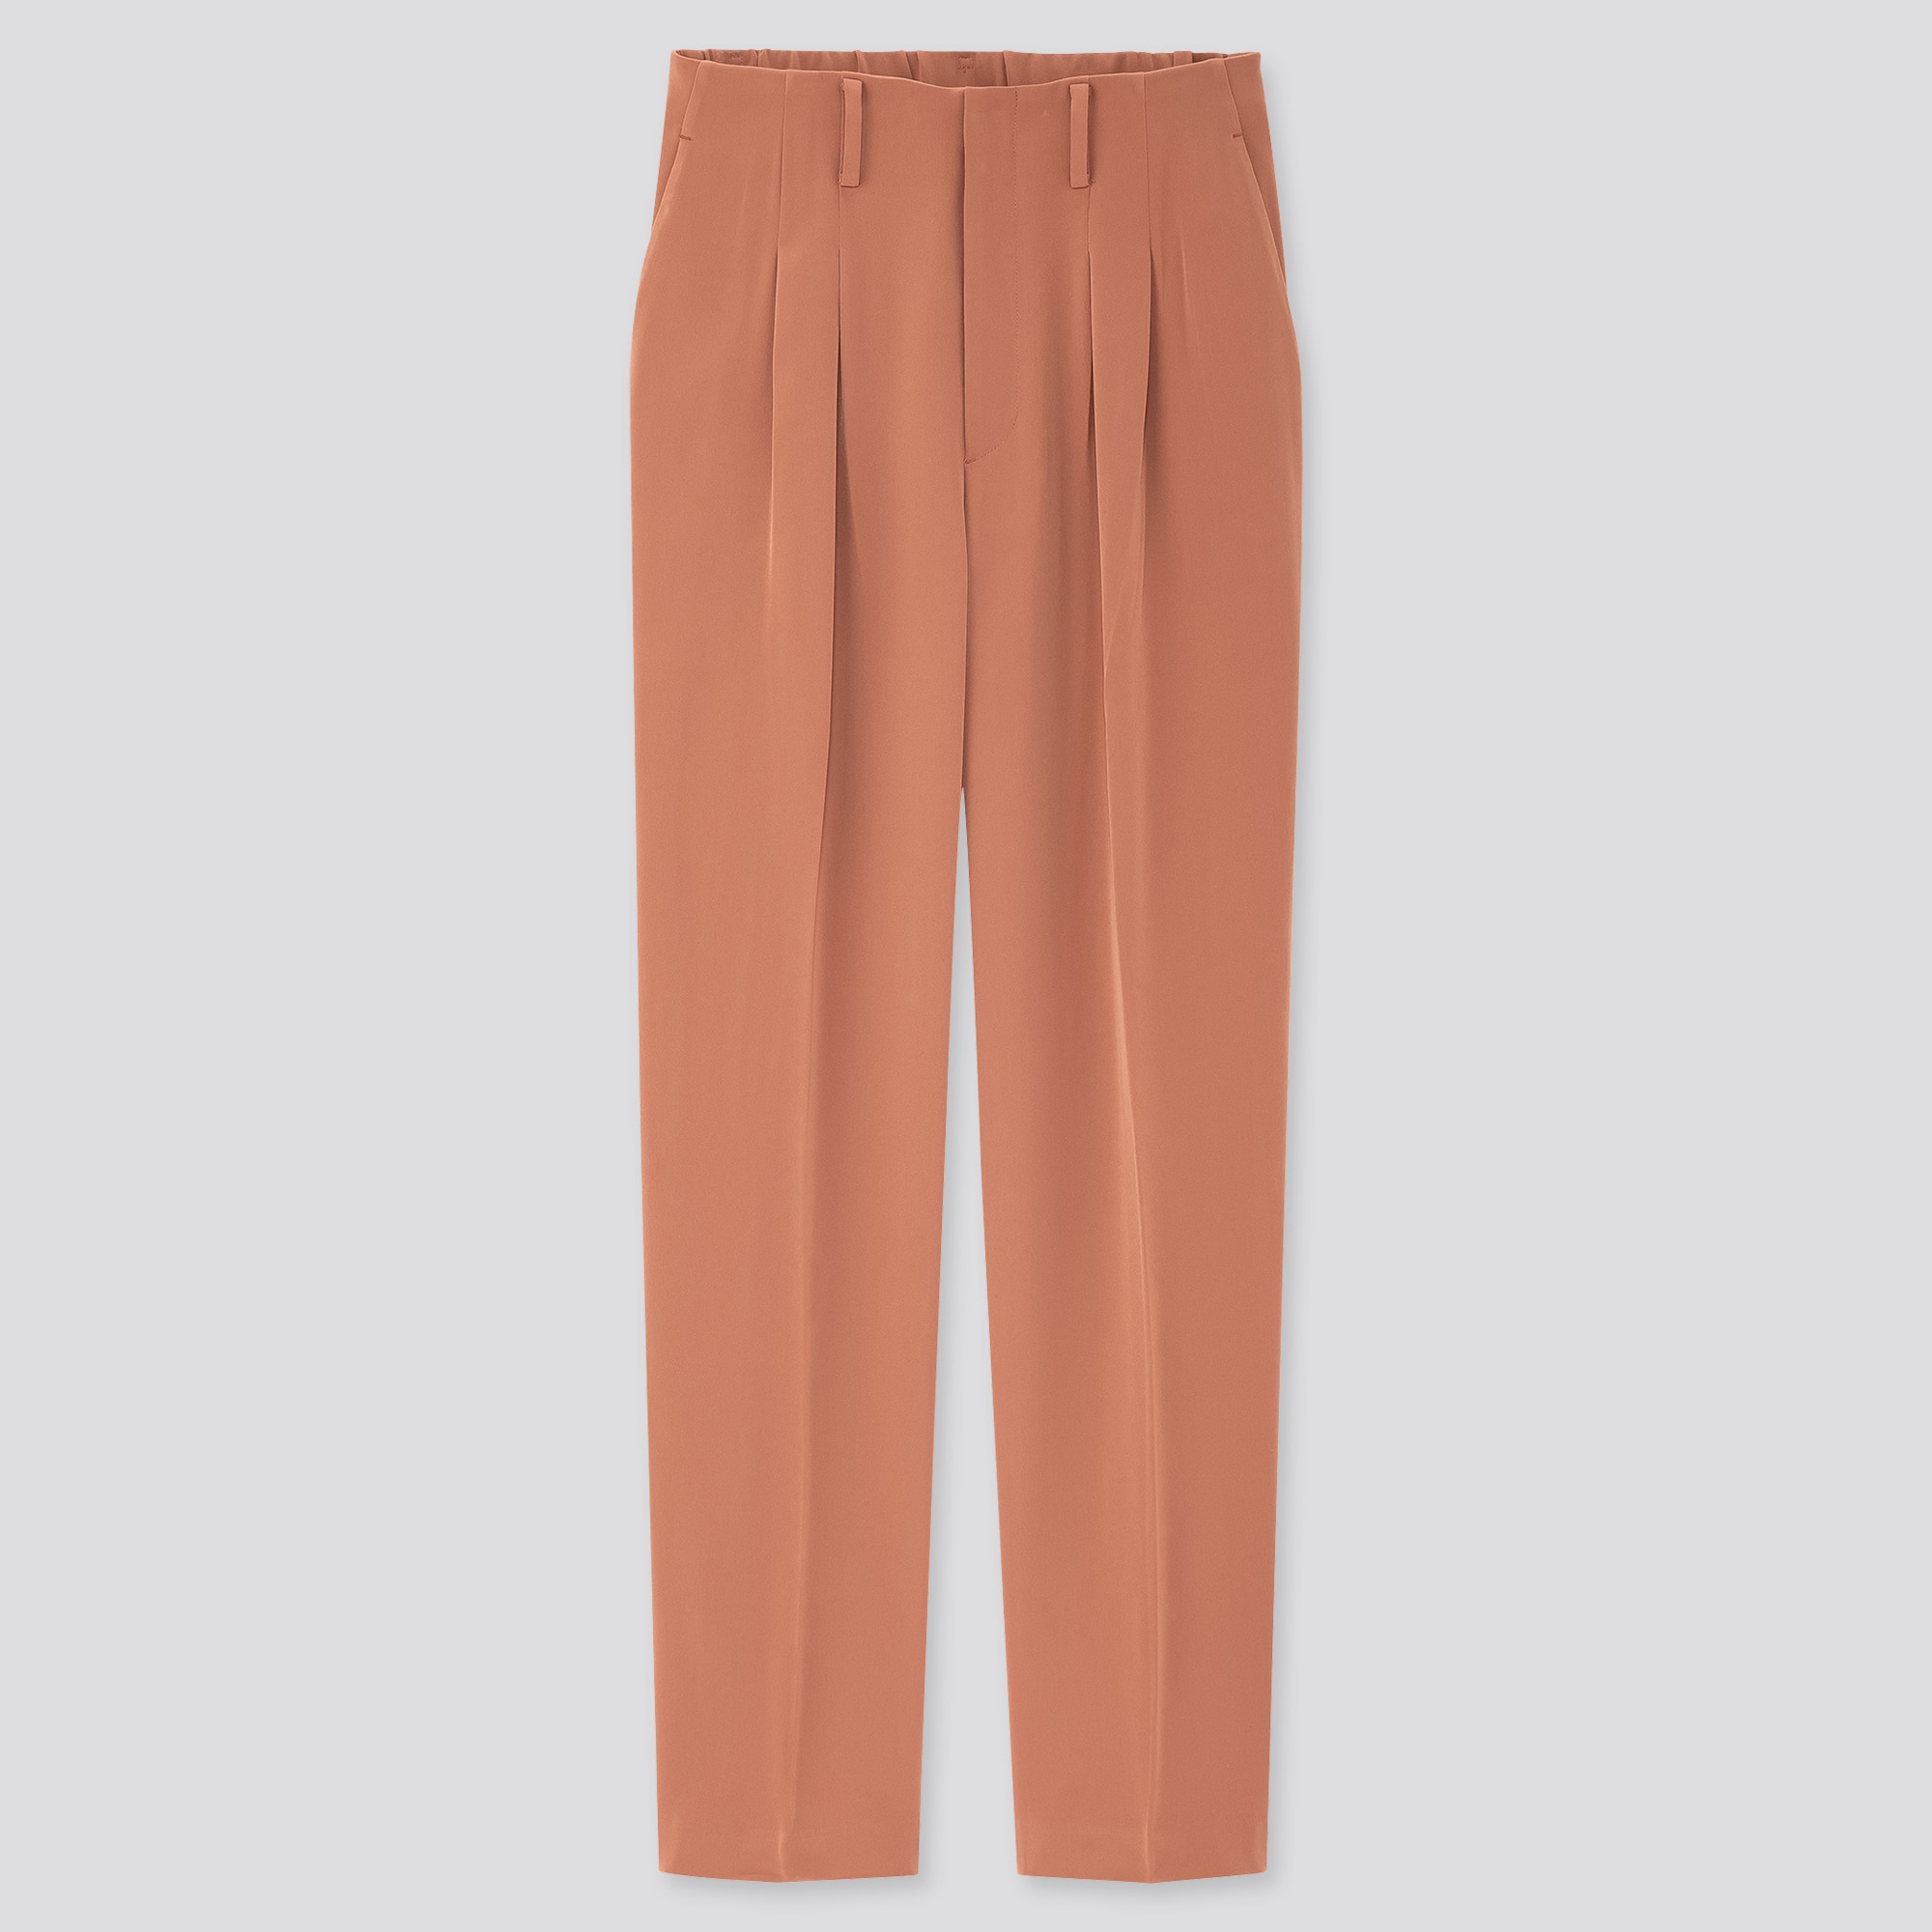 Women Drape Relaxed Fit Tapered Ankle Length Trousers